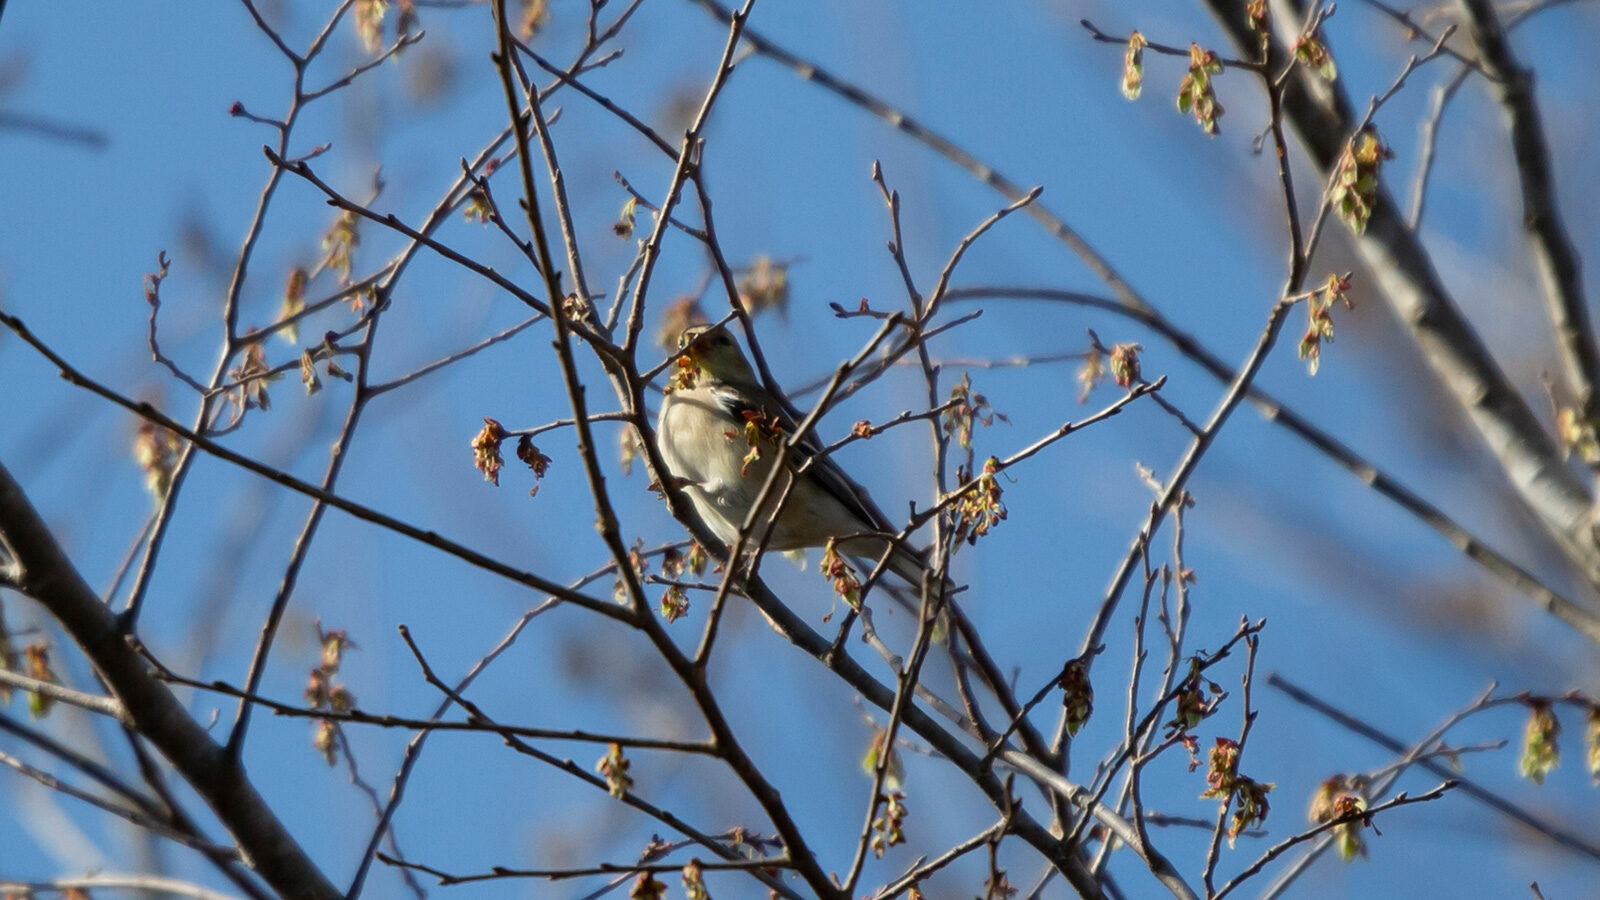 American goldfinch foraging in a tree